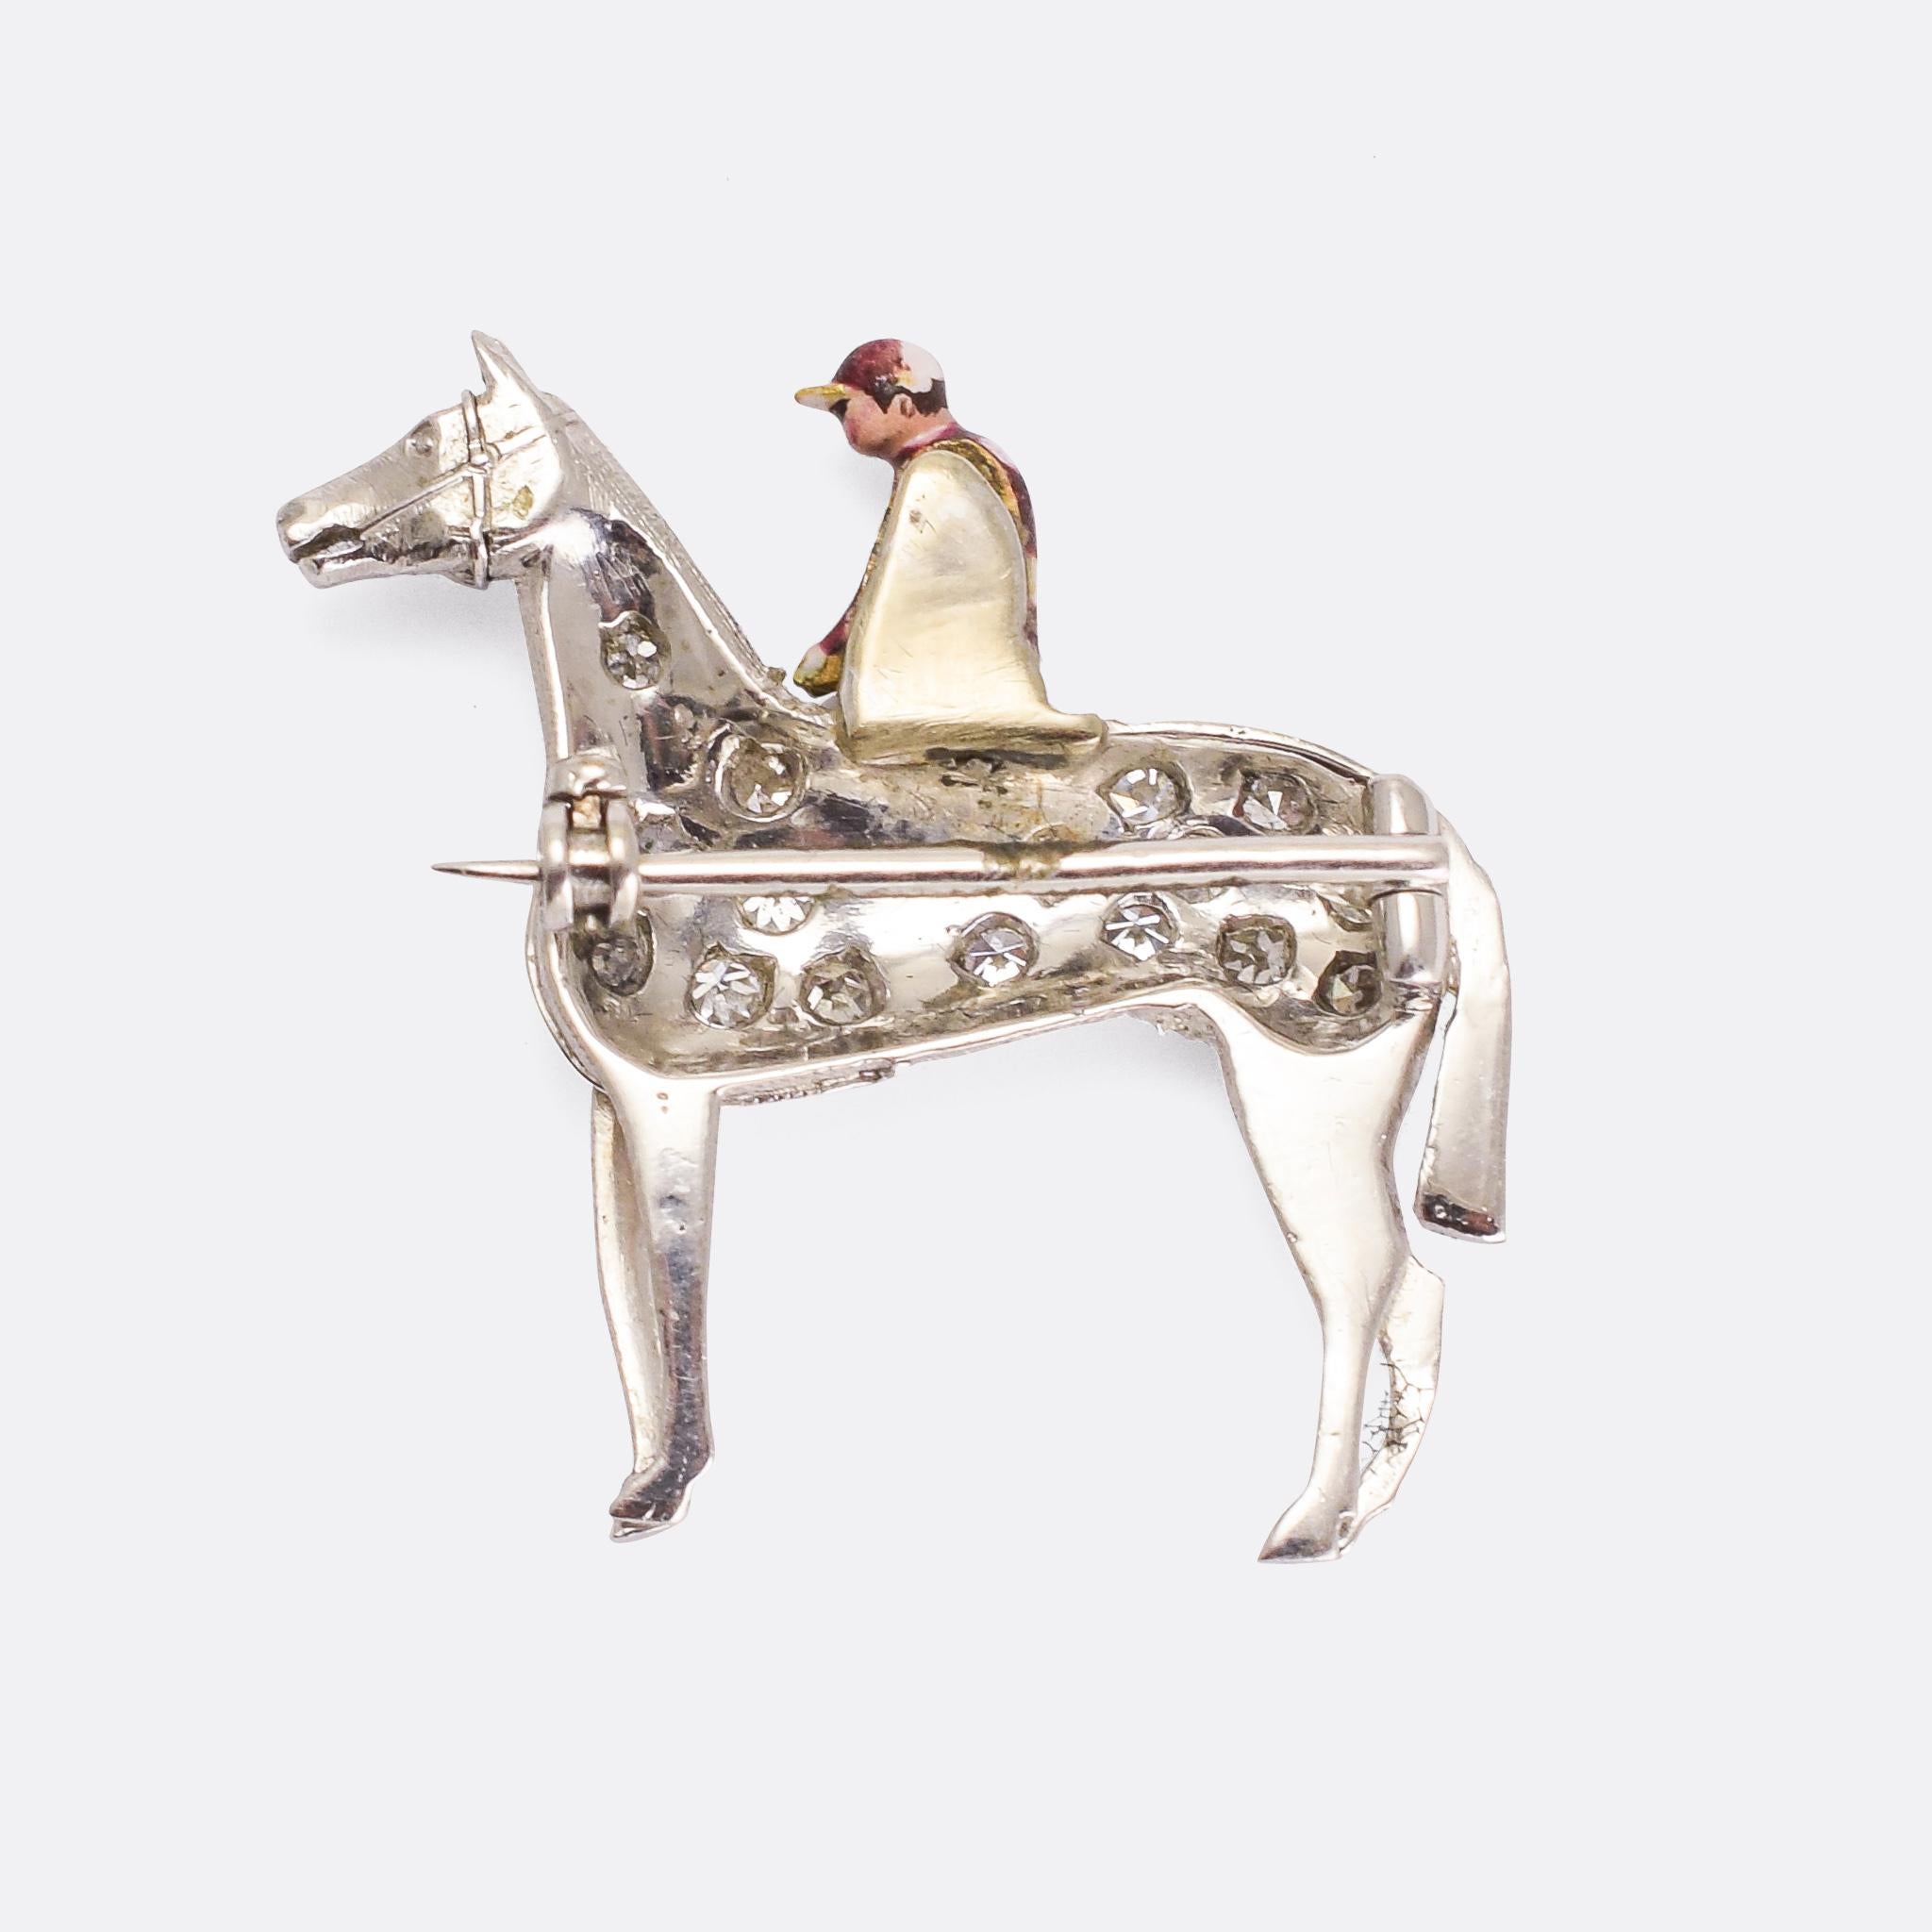 A stunning antique equestrian brooch modelled as a horse and jockey. It's platinum throughout, and set with eight-cut diamonds with the rider finished in purple and white polka-dot enamel. The quality is exceptionally good, with a high level of